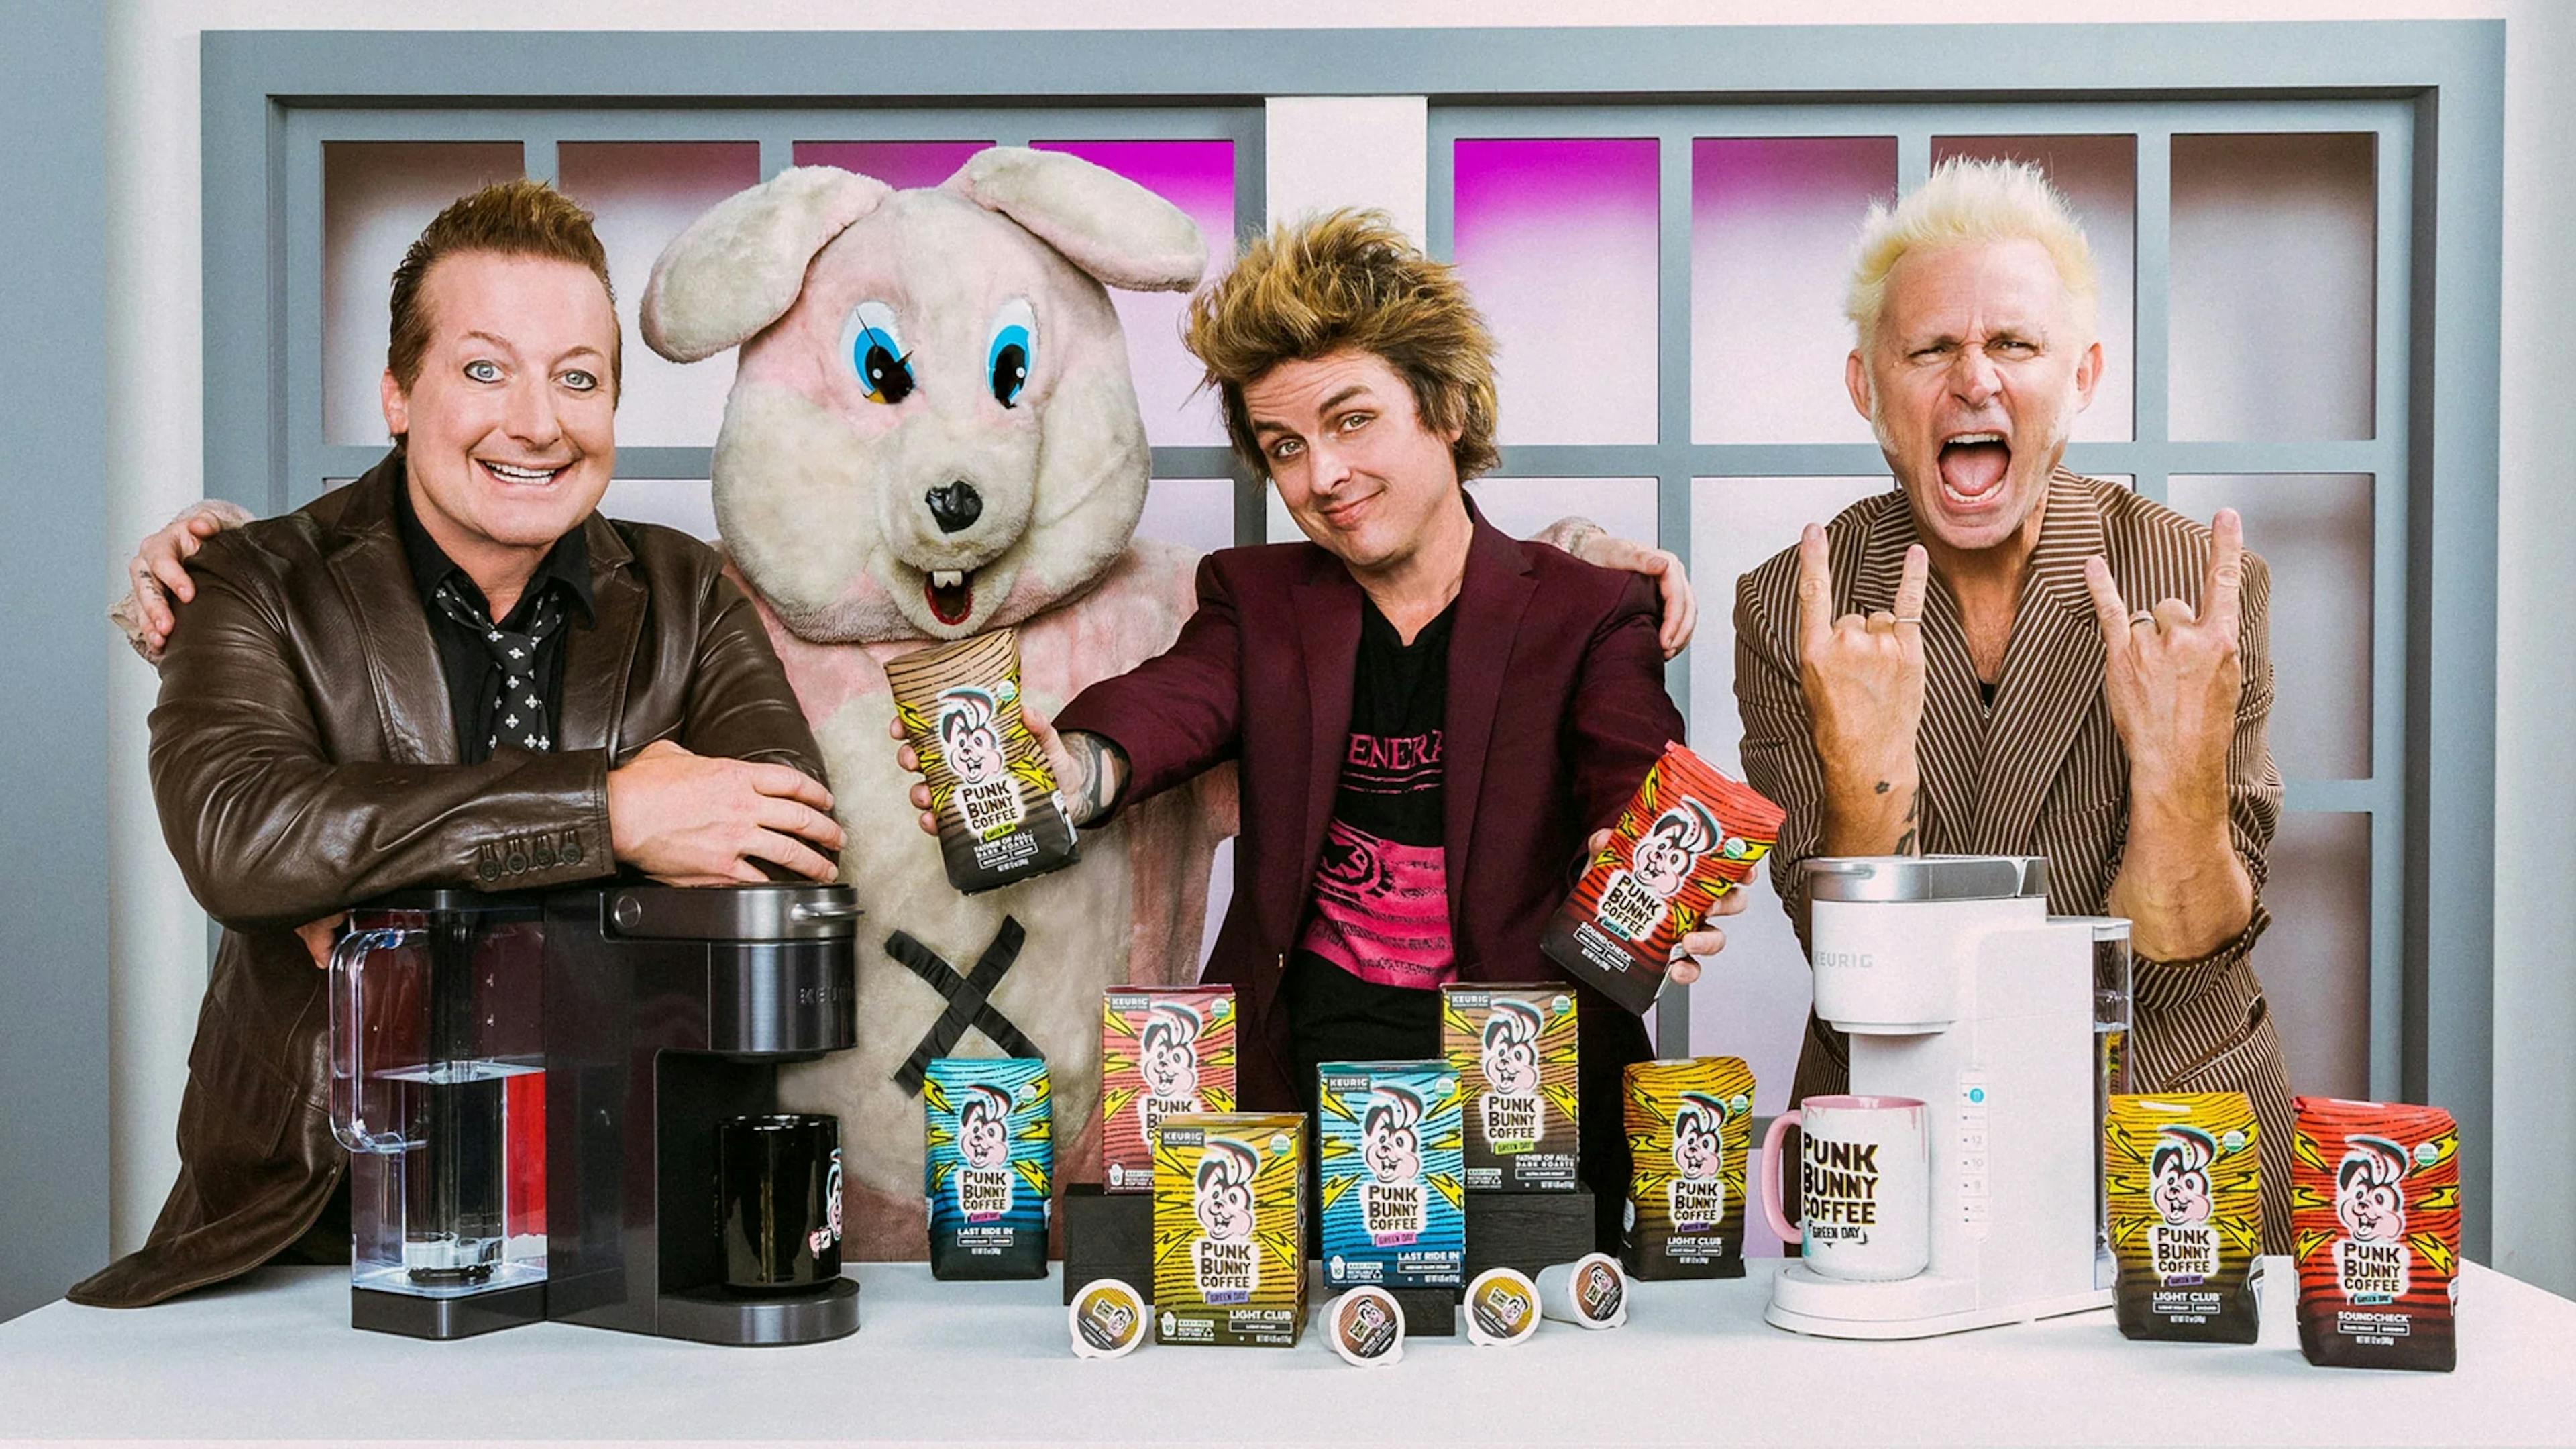 Green Day officially launch their very own Punk Bunny Coffee